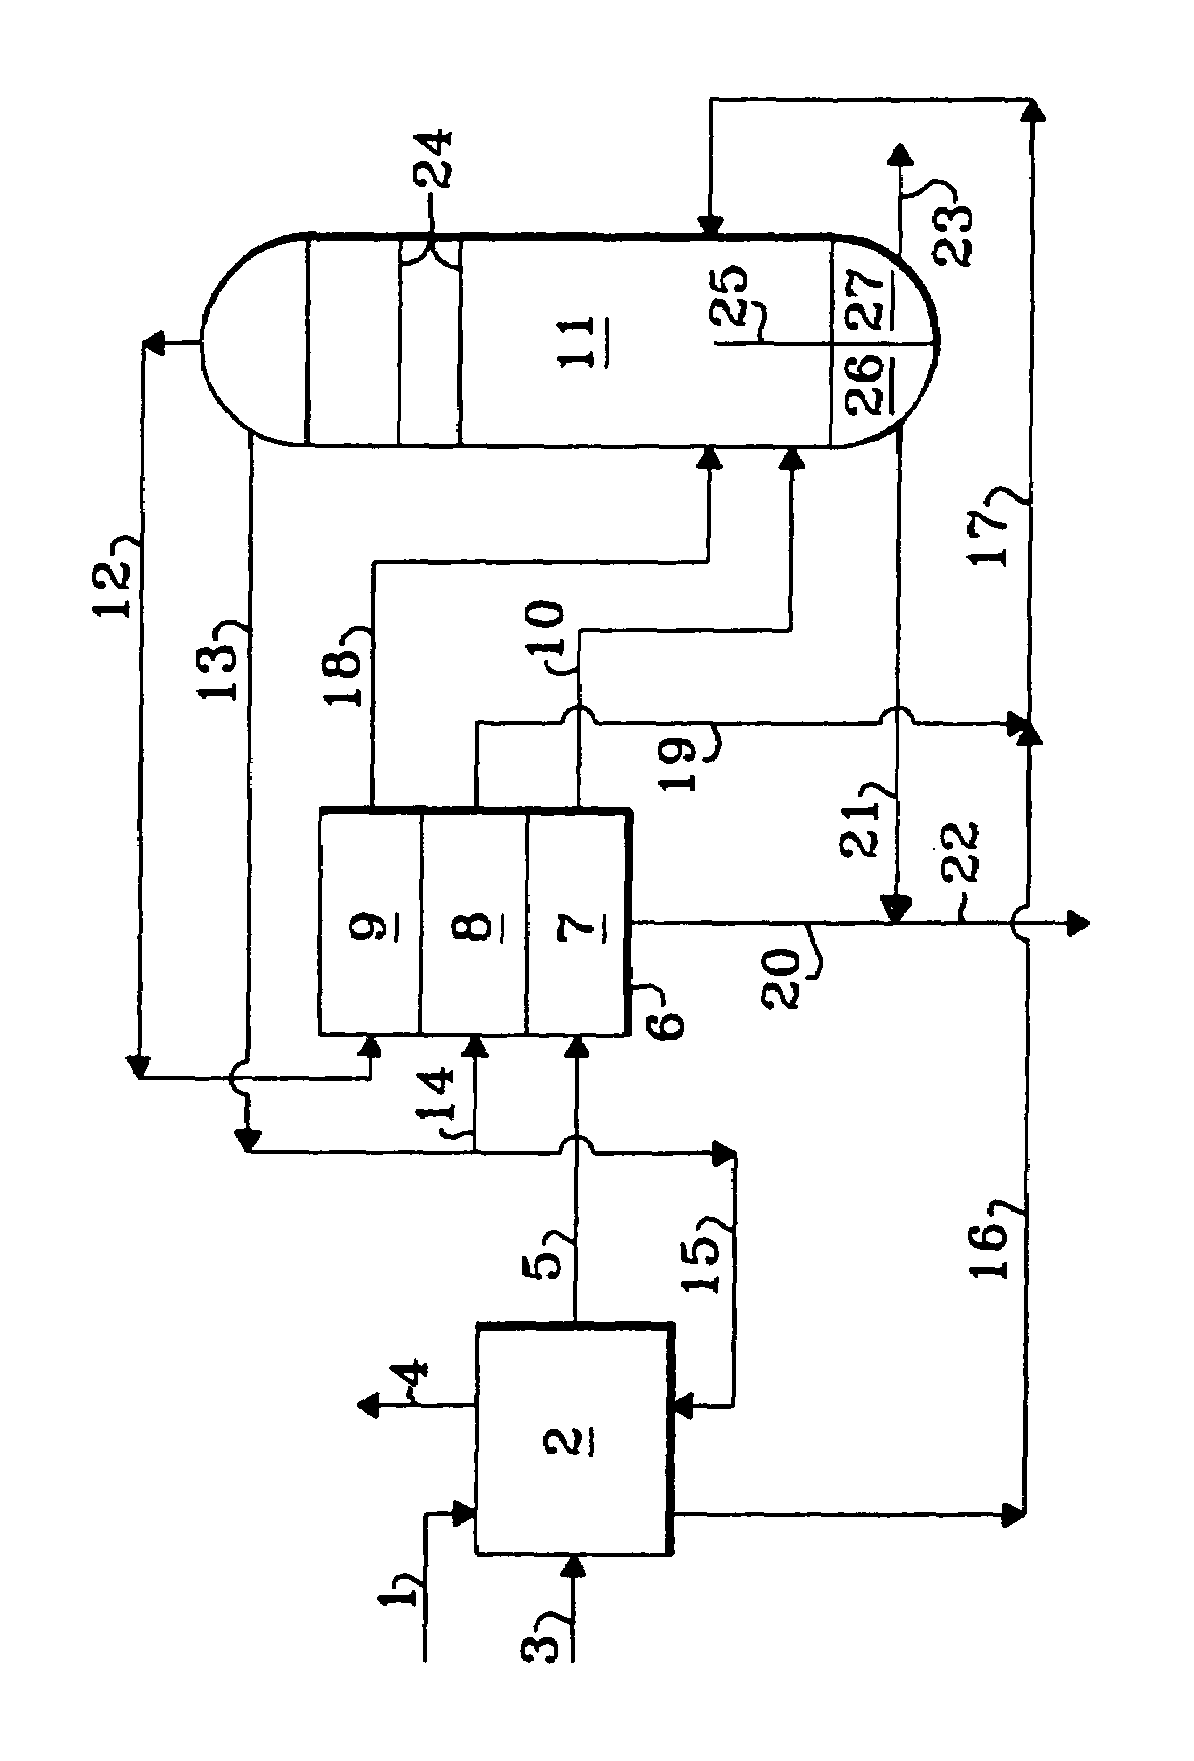 Process for the regeneration of an adsorbent bed containing sulfur oxidated compounds